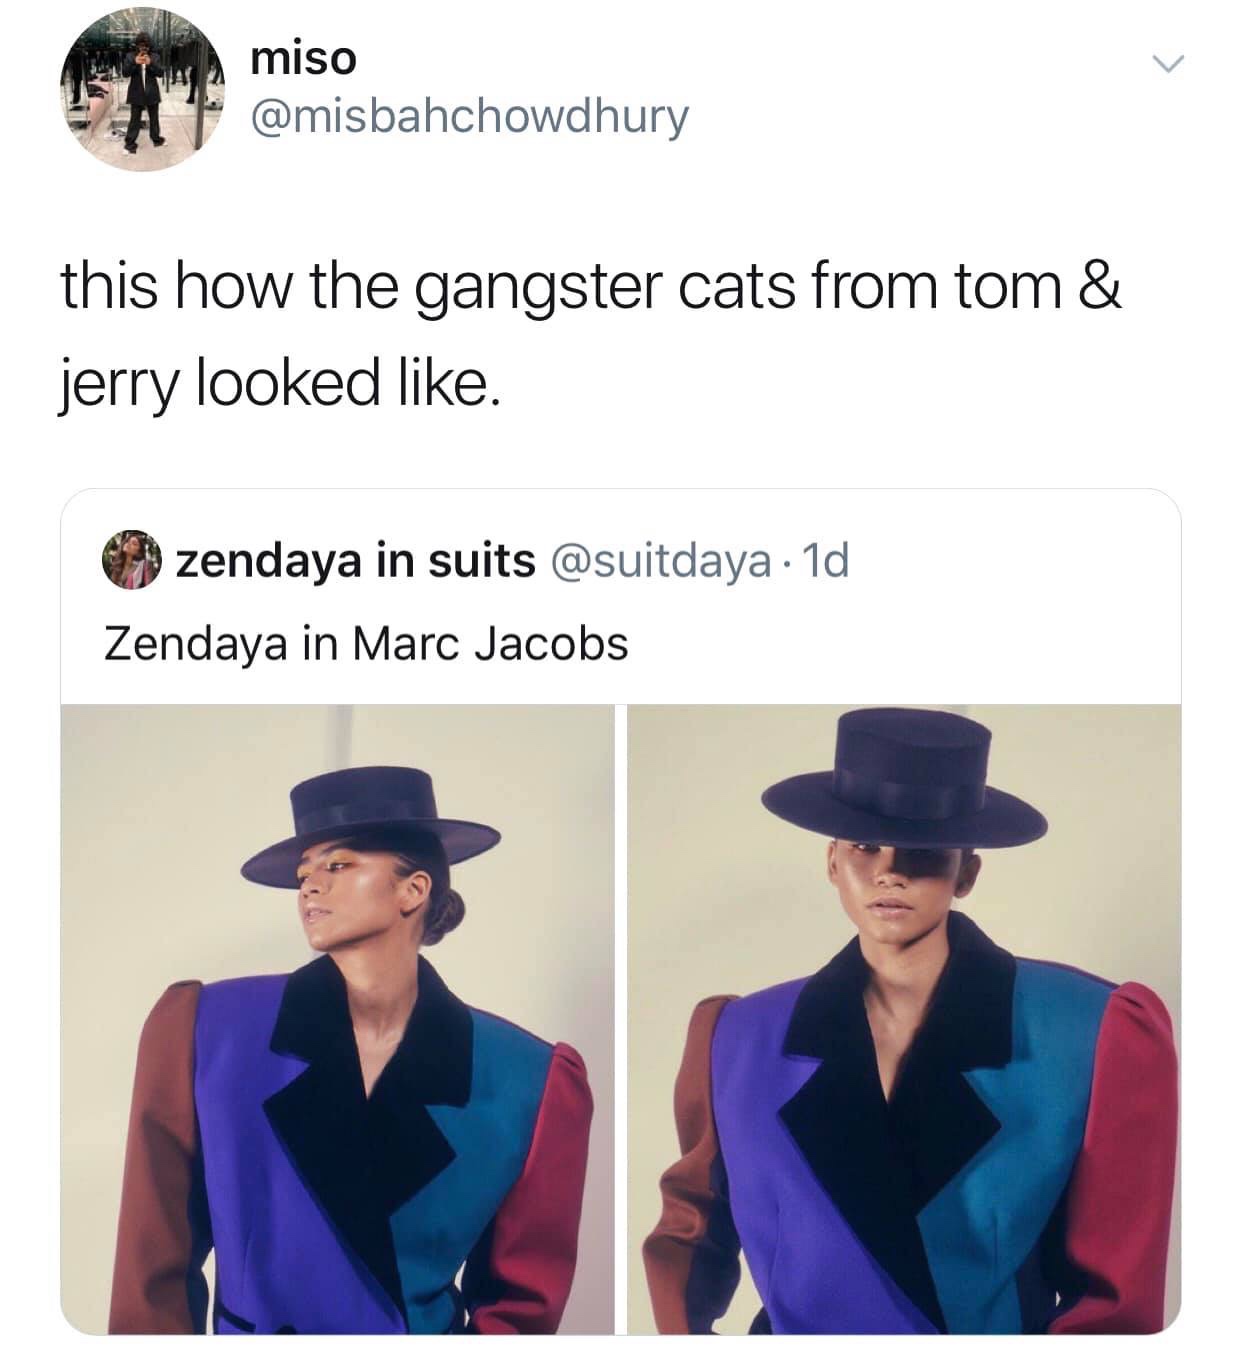 cobalt blue - miso this how the gangster cats from tom & jerry looked . zendaya in suits 1d Zendaya in Marc Jacobs